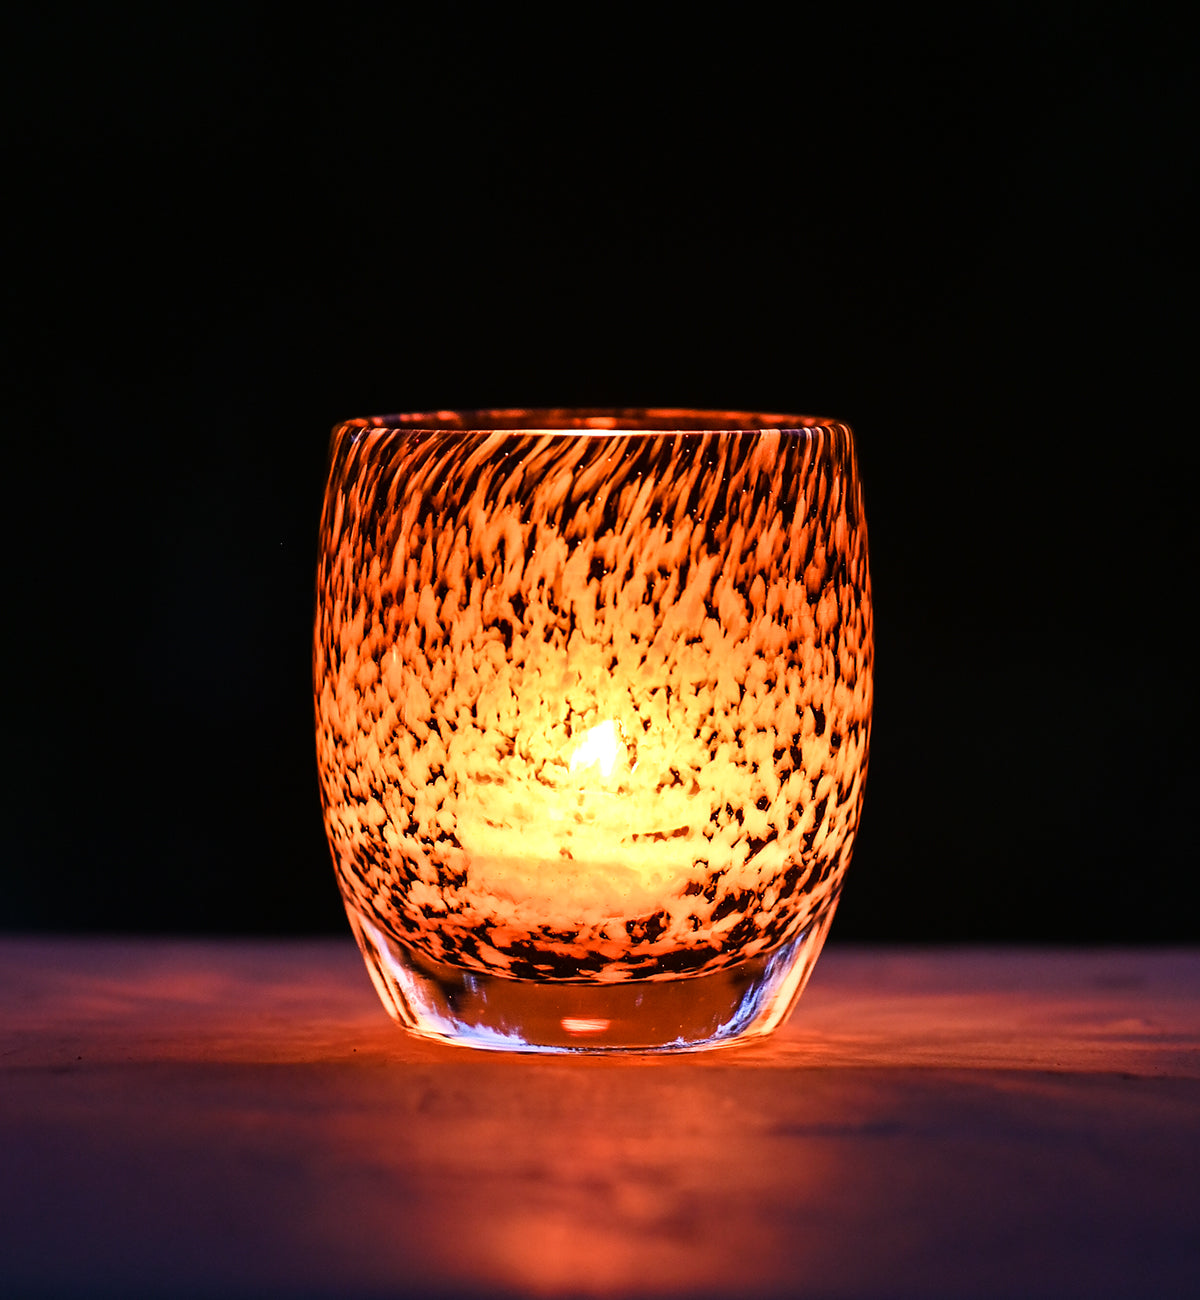 under a wing, an amber and brown mottled hand-blown glass votive candle holder.